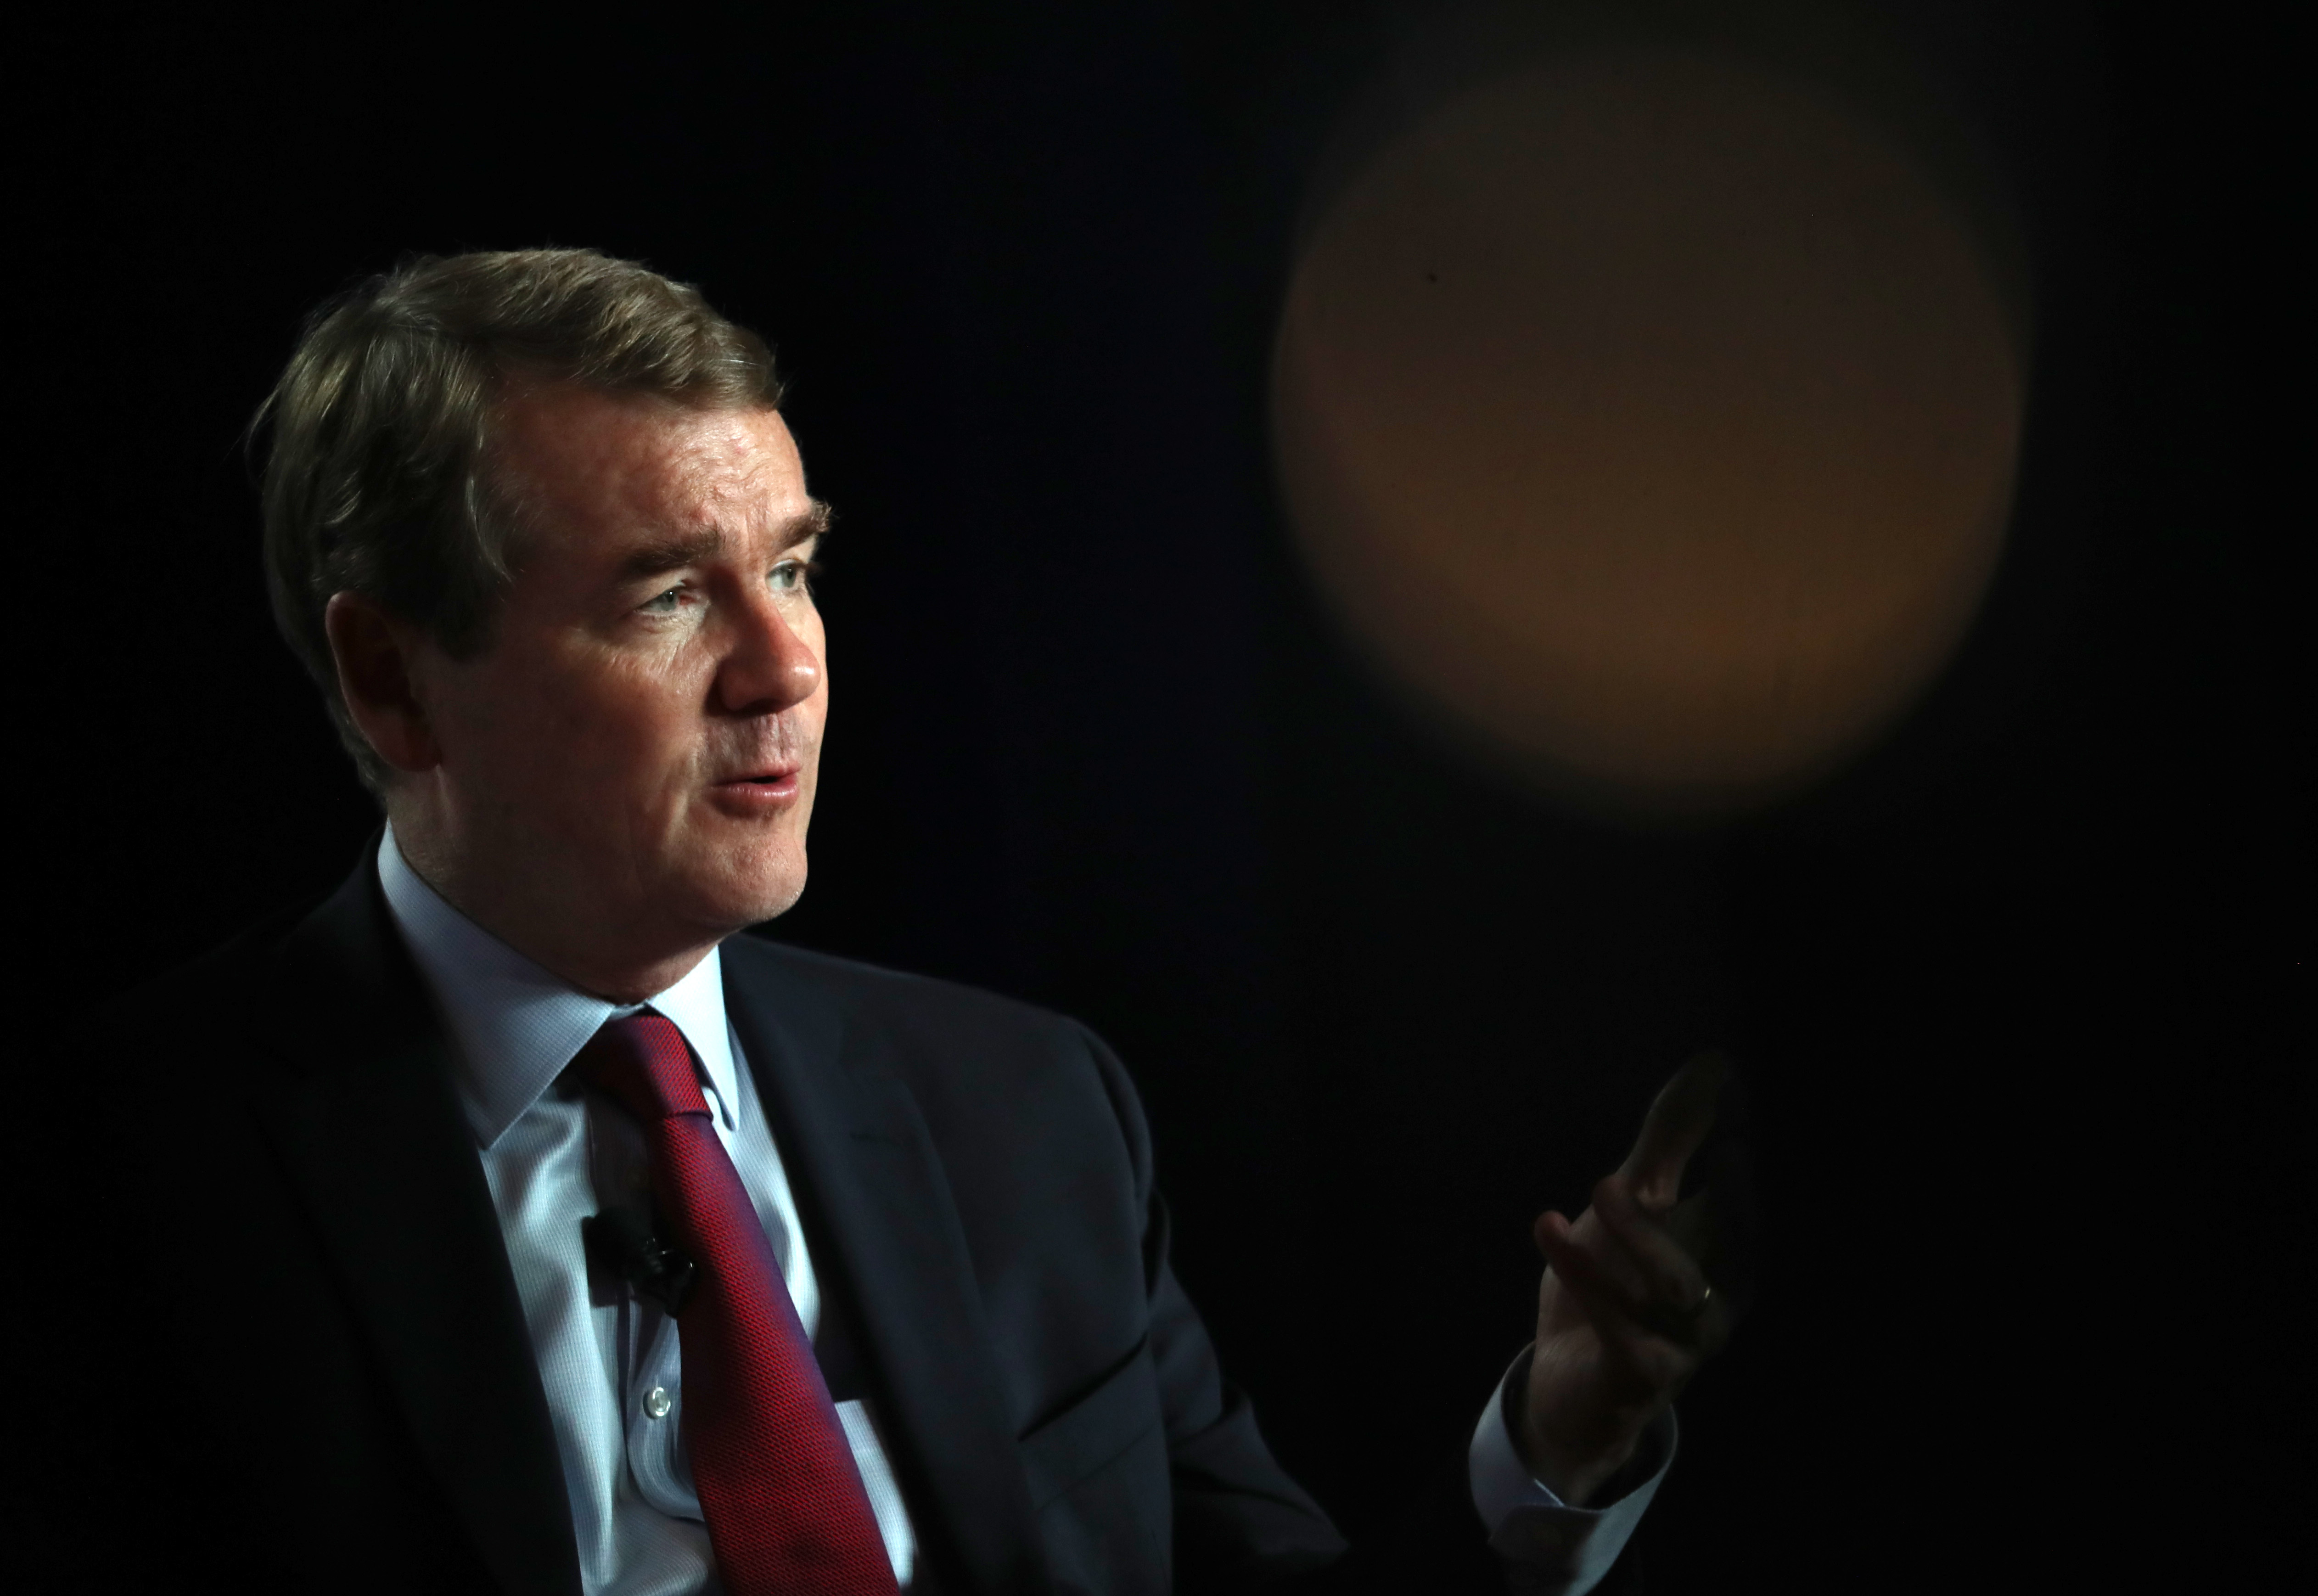 Democratic presidential candidate U.S. Sen. Michael Bennet (D-CO) speaks during the AARP and The Des Moines Register Iowa Presidential Candidate Forum on July 17, 2019 in Cedar Rapids, Iowa.